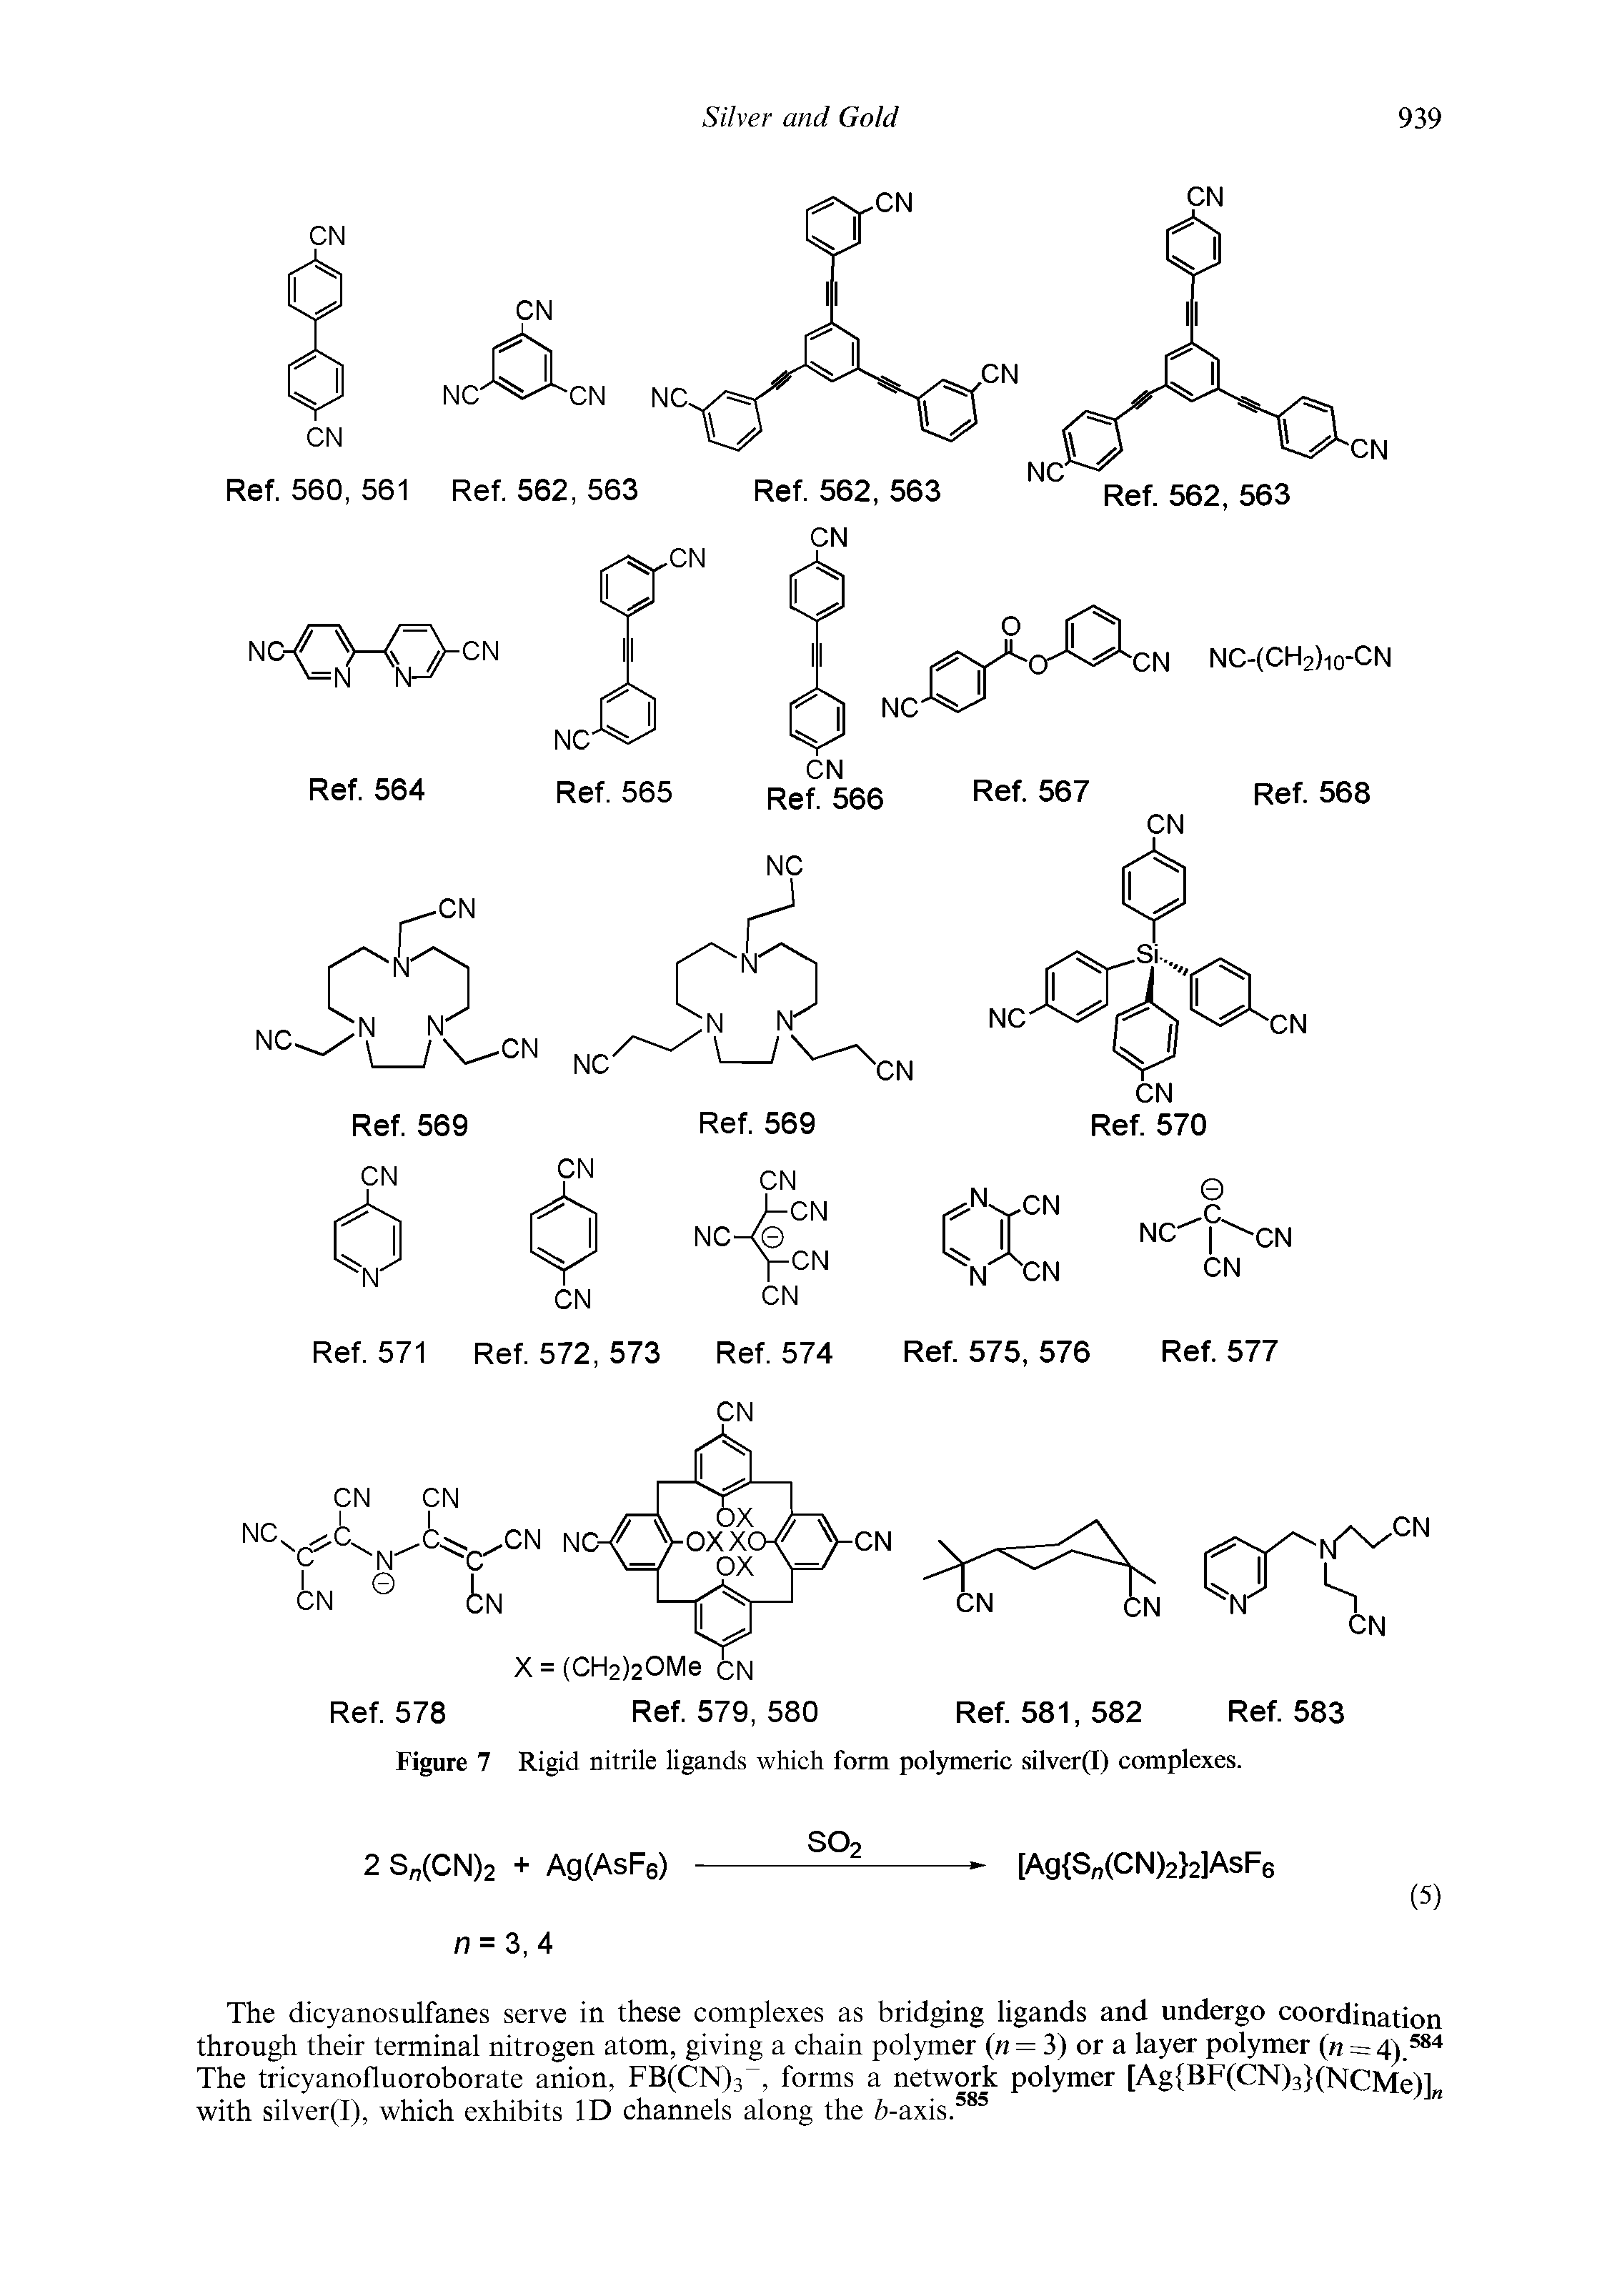 Figure 7 Rigid nitrile ligands which form polymeric silver(I) complexes.